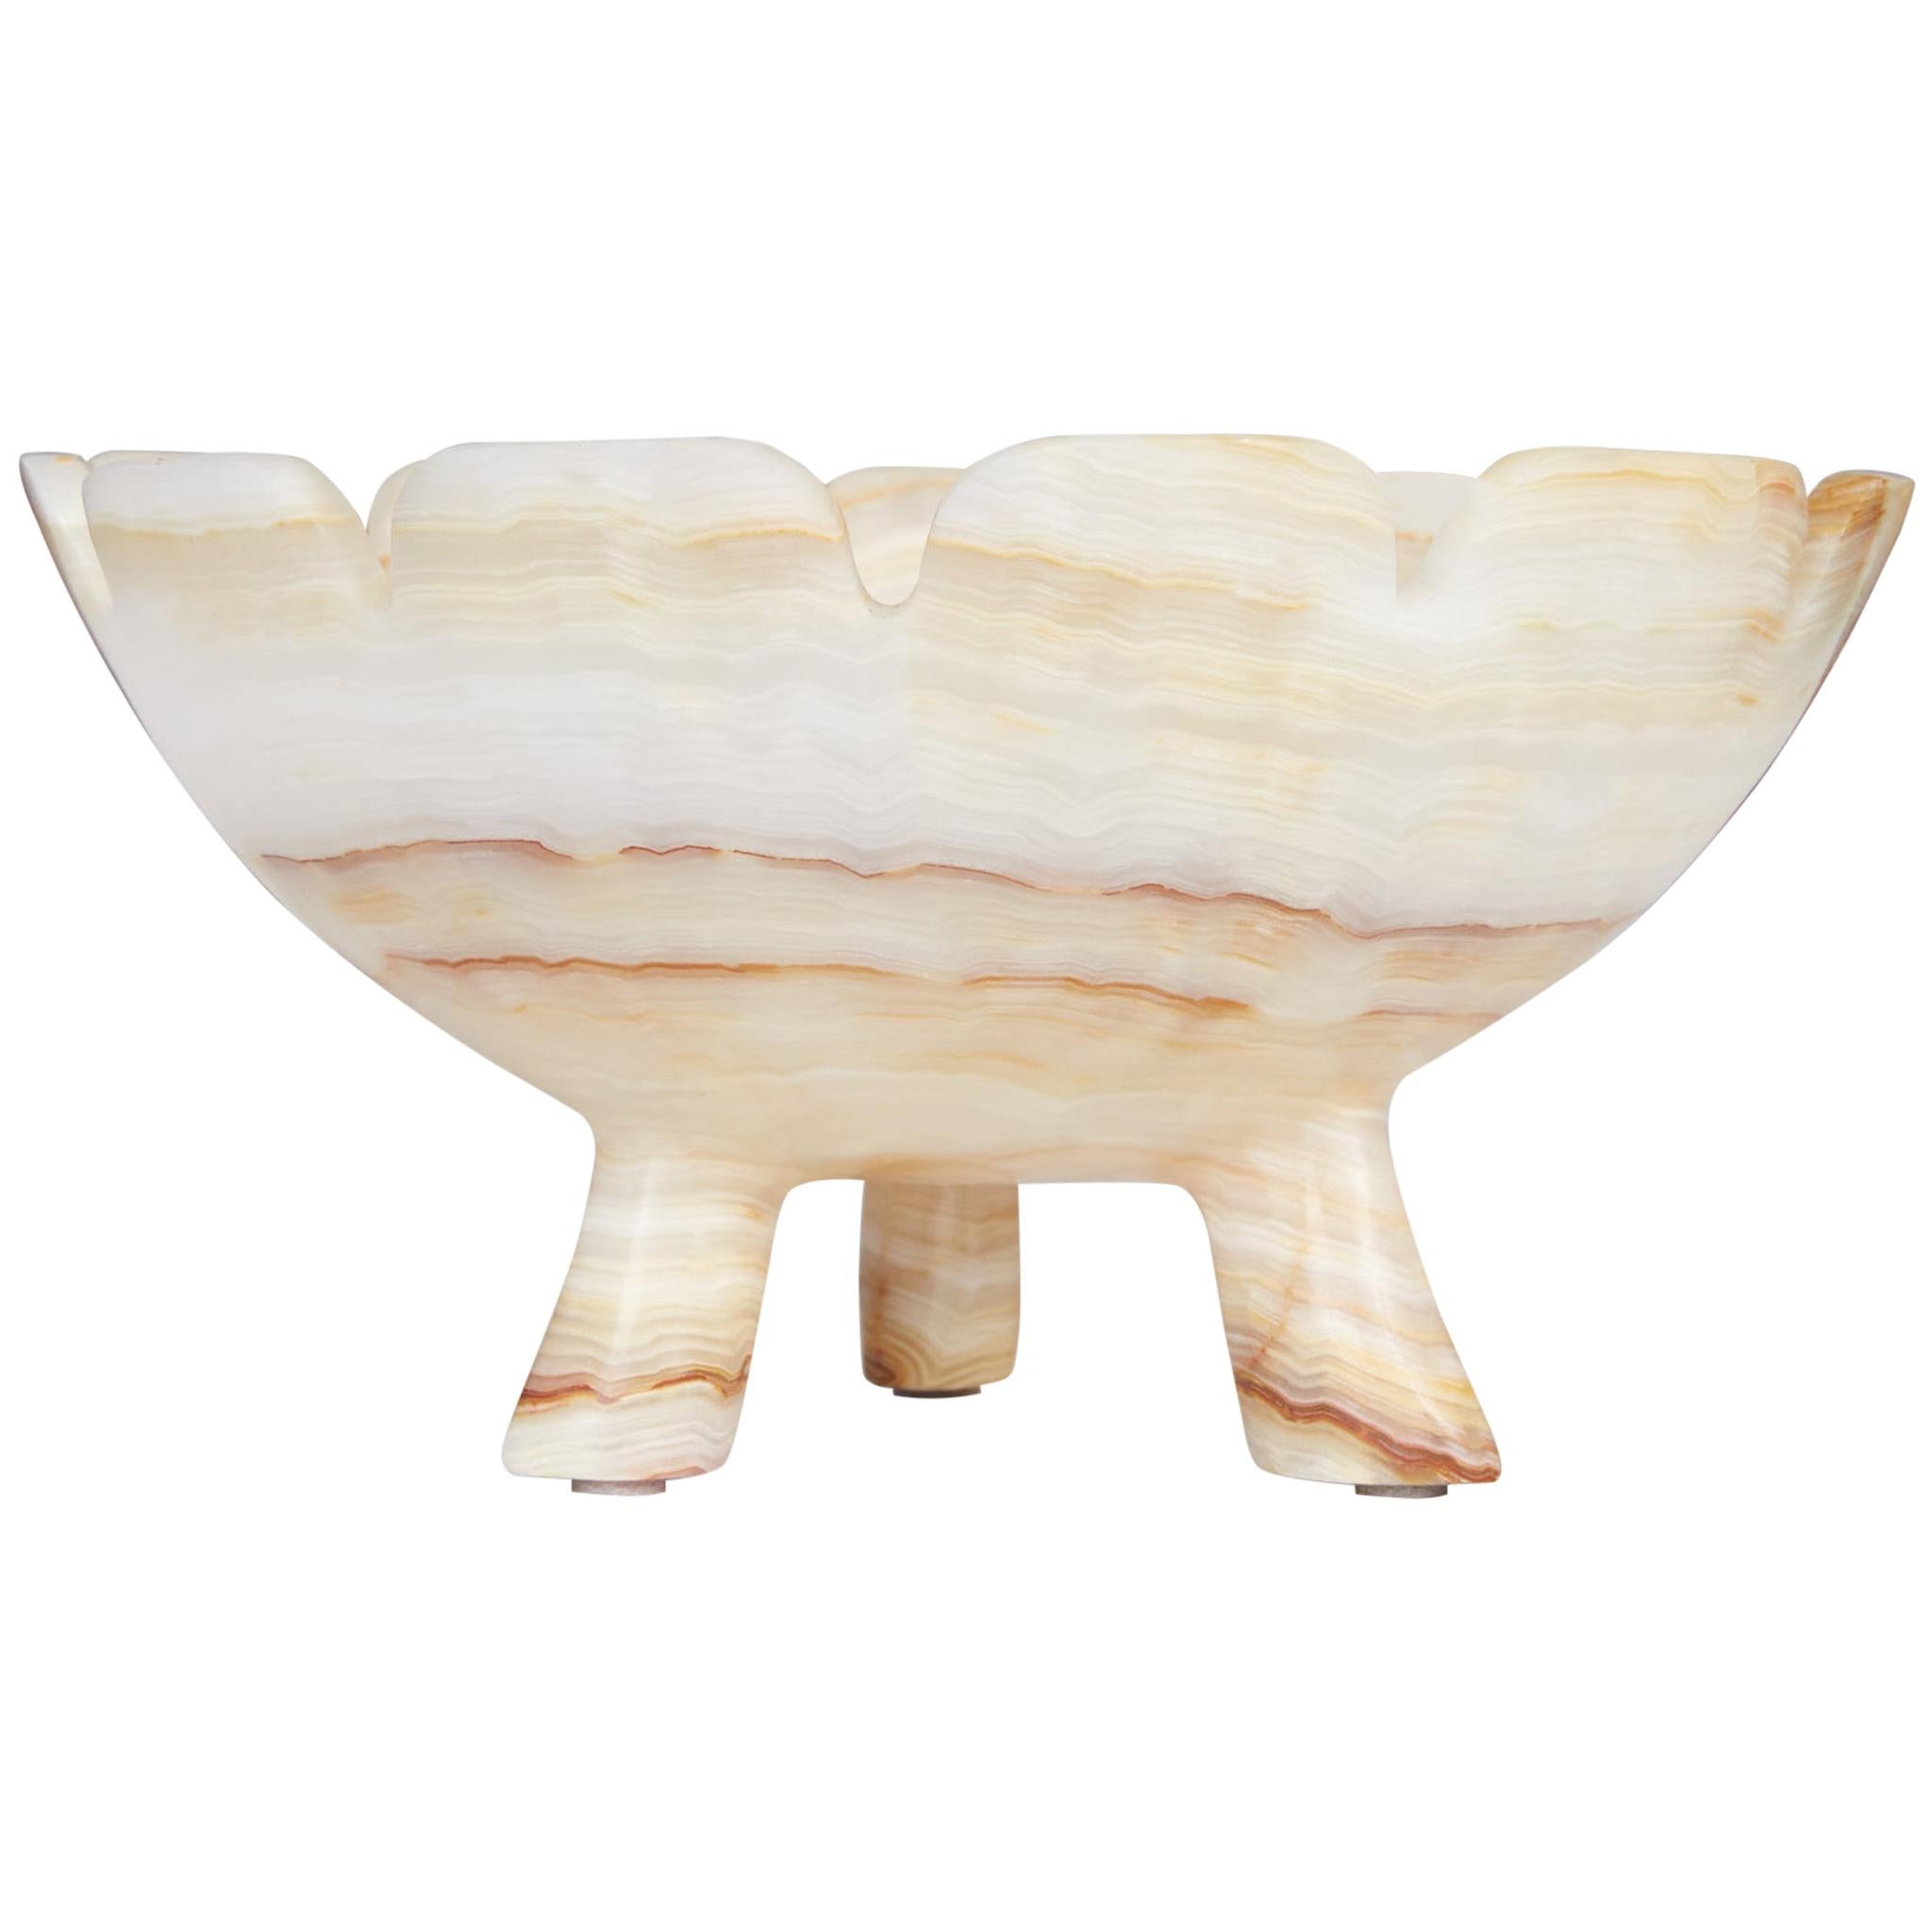 Hand Carved Alabaster Bowl with Tripod Legs